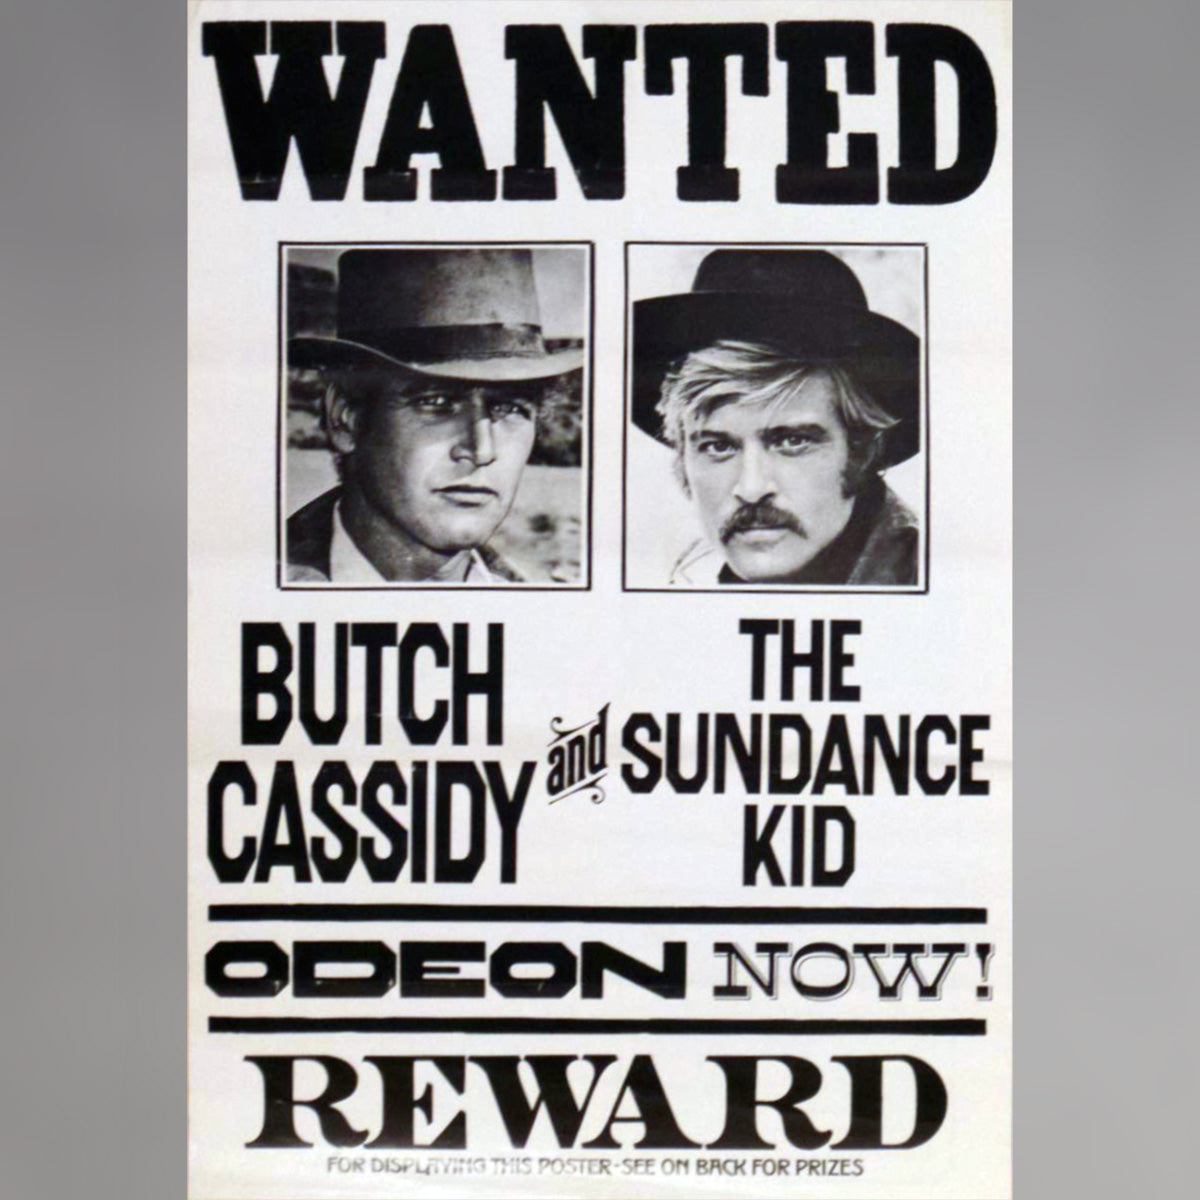 Original Movie Poster of Butch Cassidy And The Sundance Kid (1969)